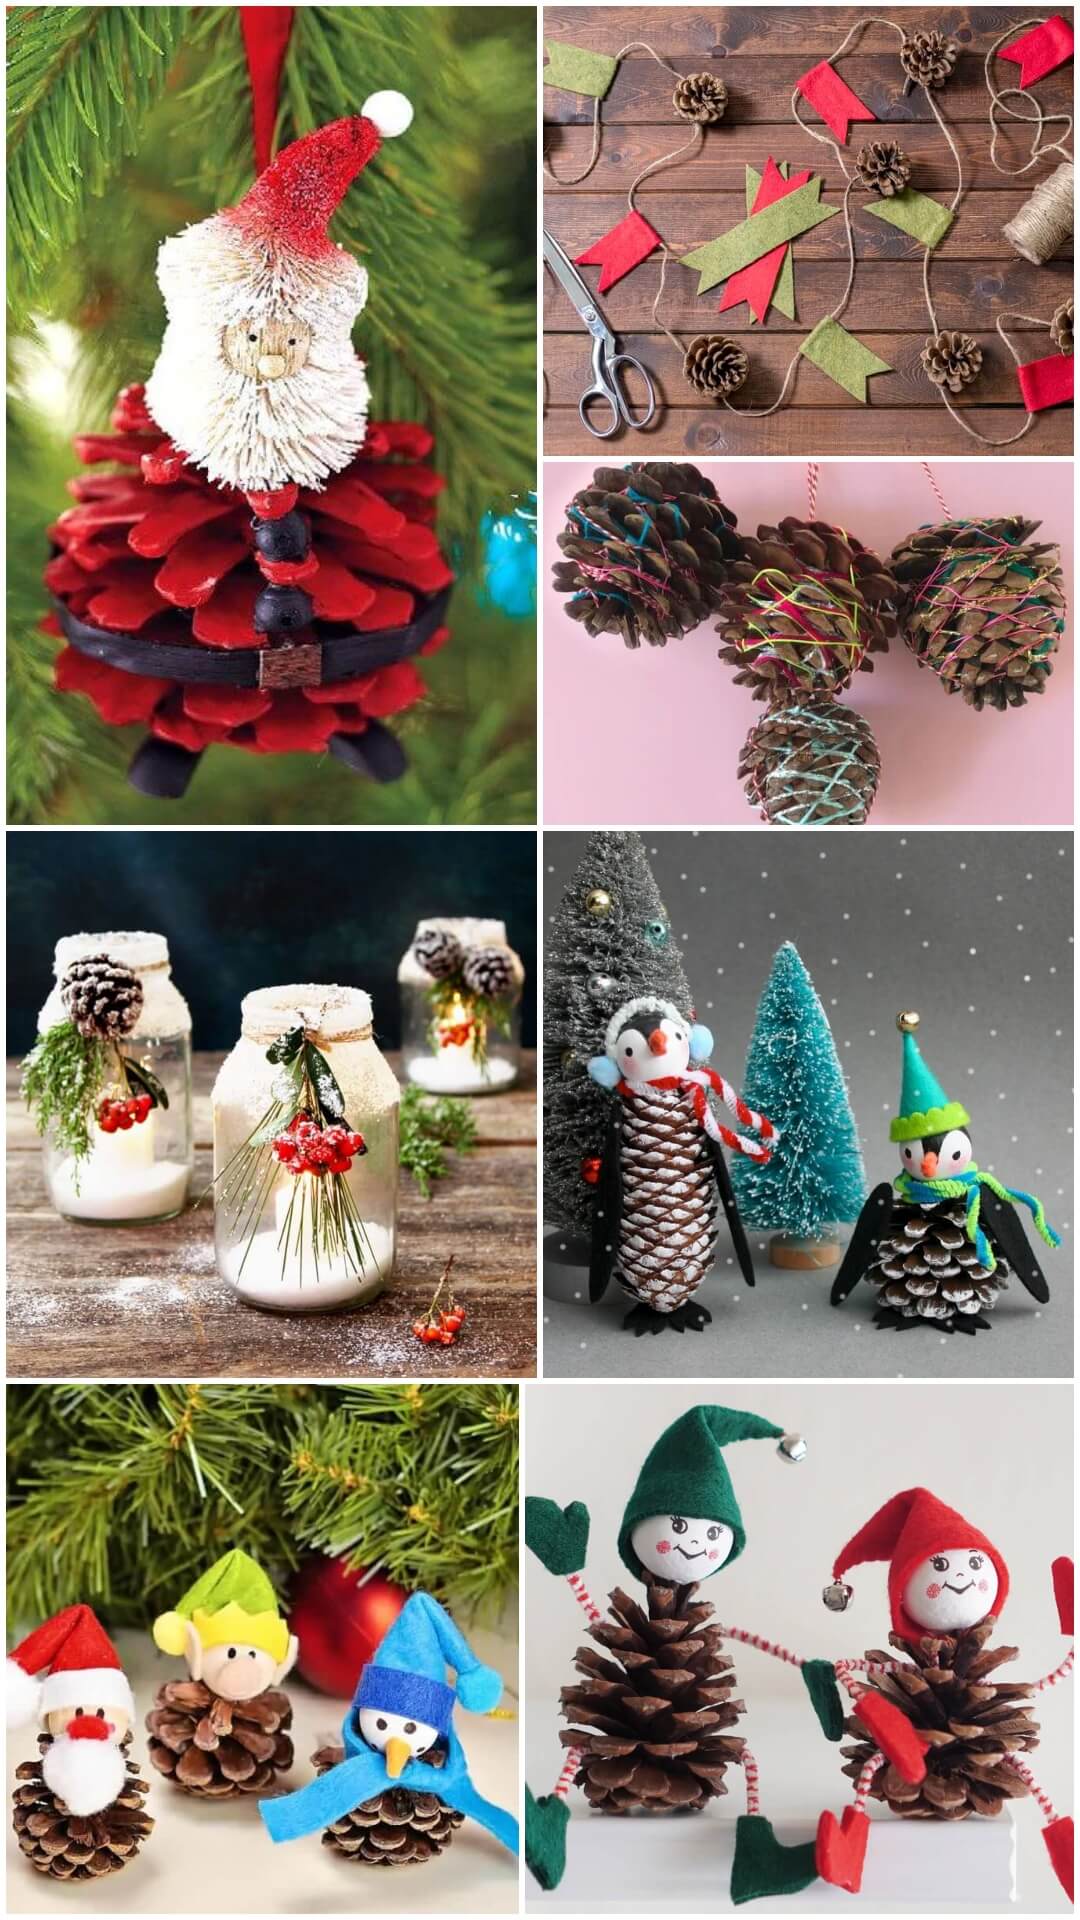 Pine Cone Decoration Crafts For Christmas